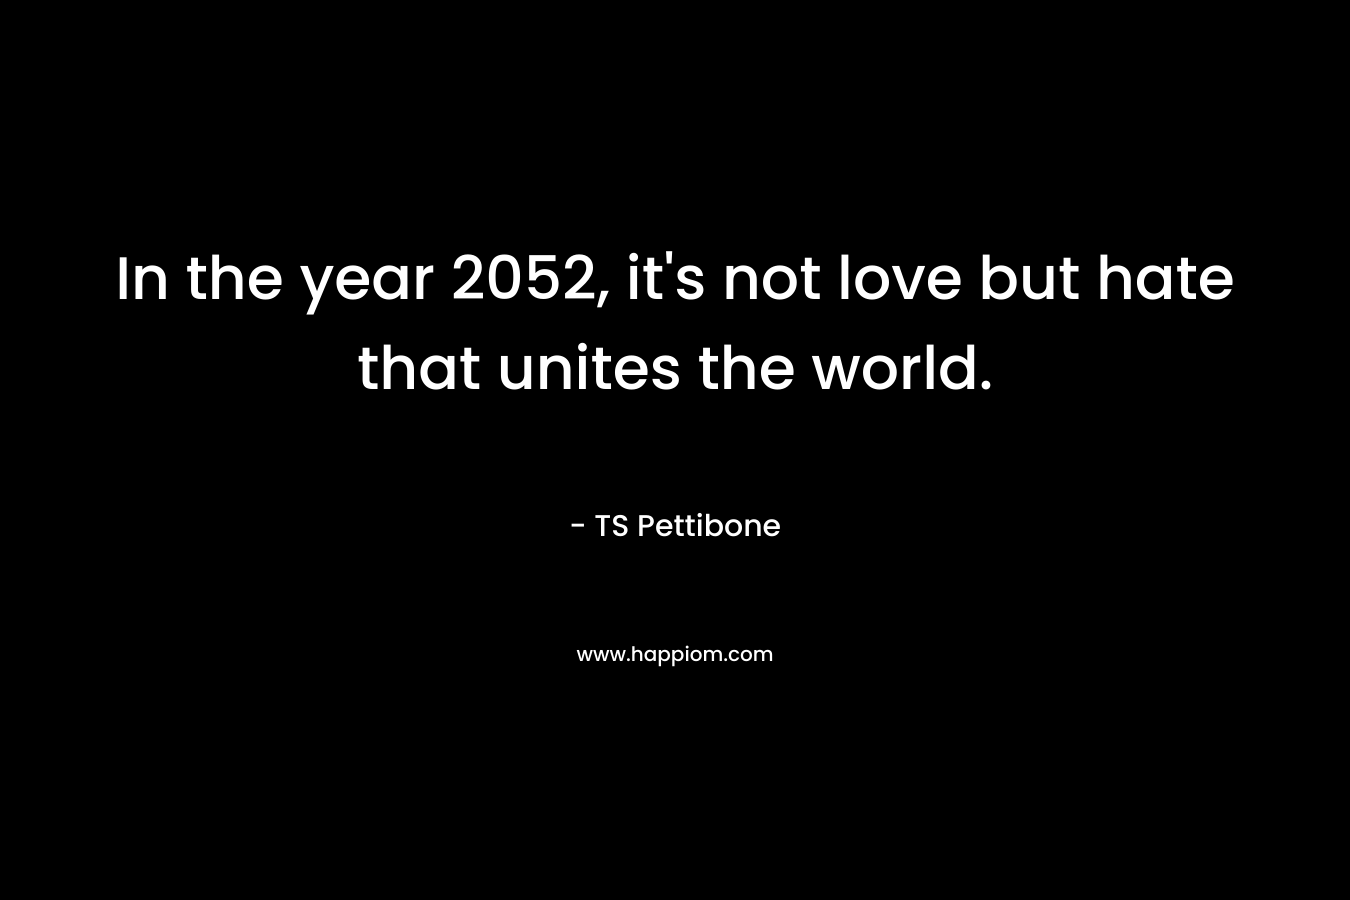 In the year 2052, it's not love but hate that unites the world.